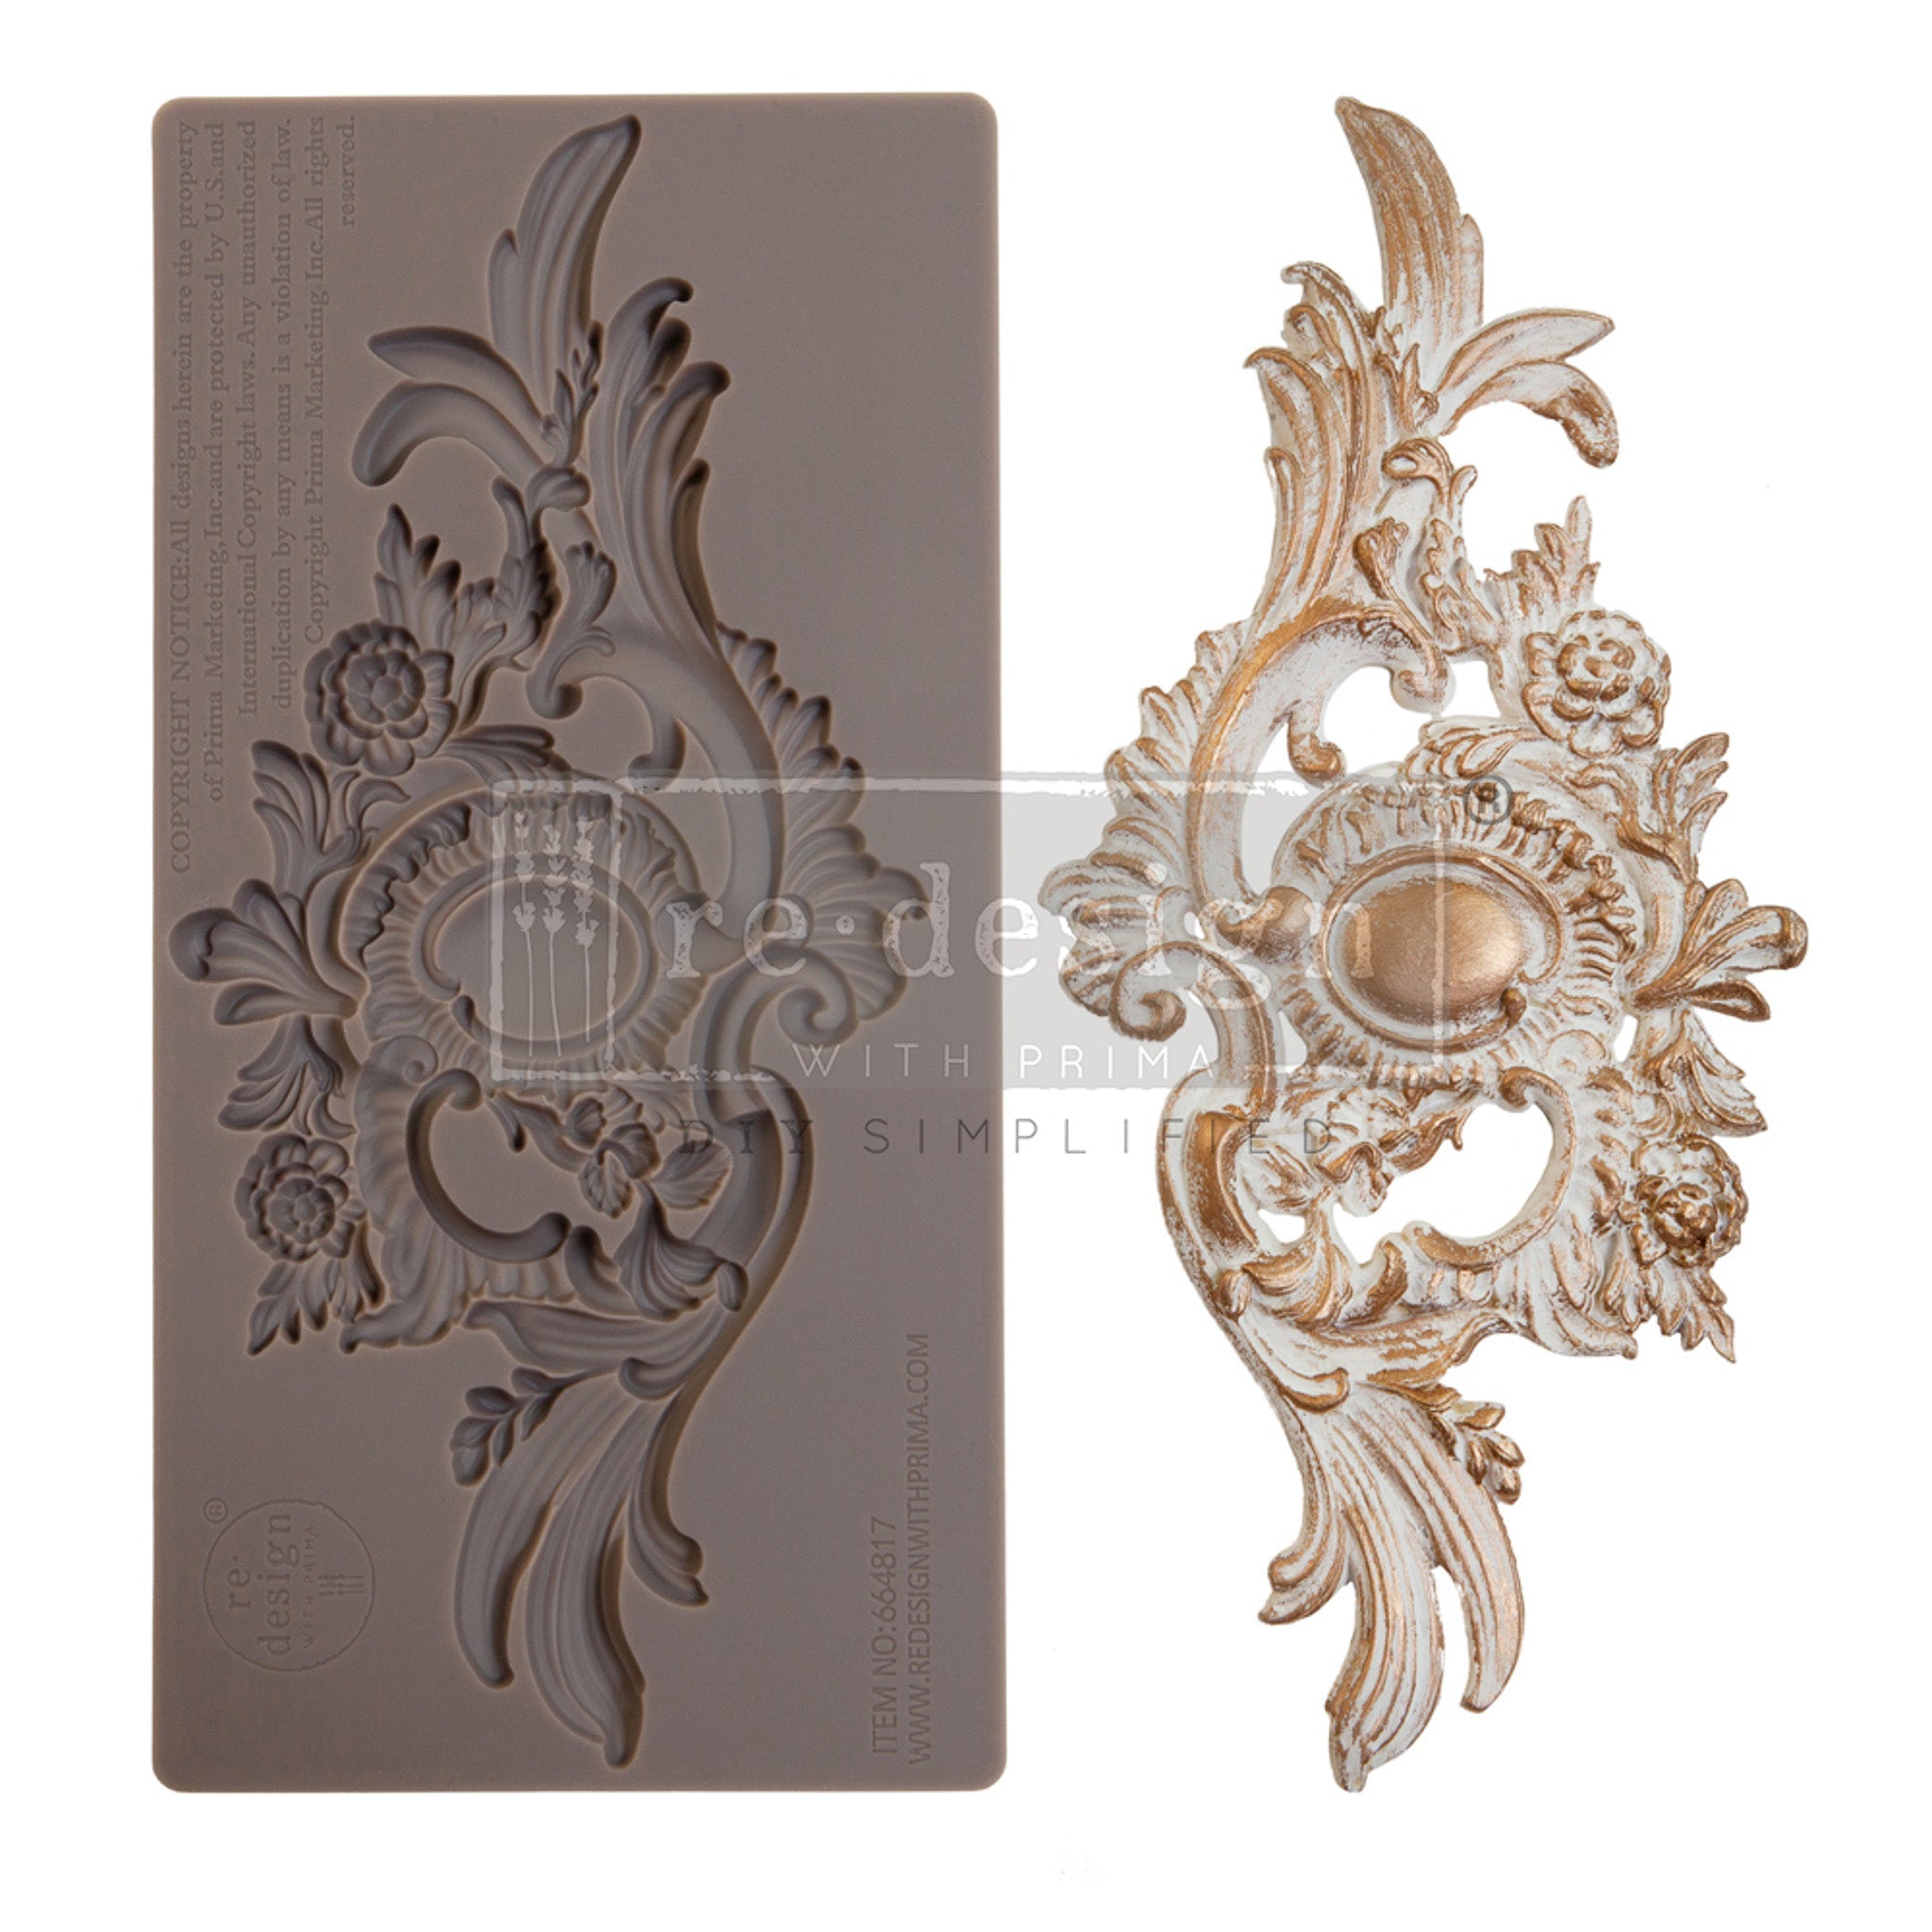 Silicone mould and its casting that features an ornate leafy accent design against a white background.